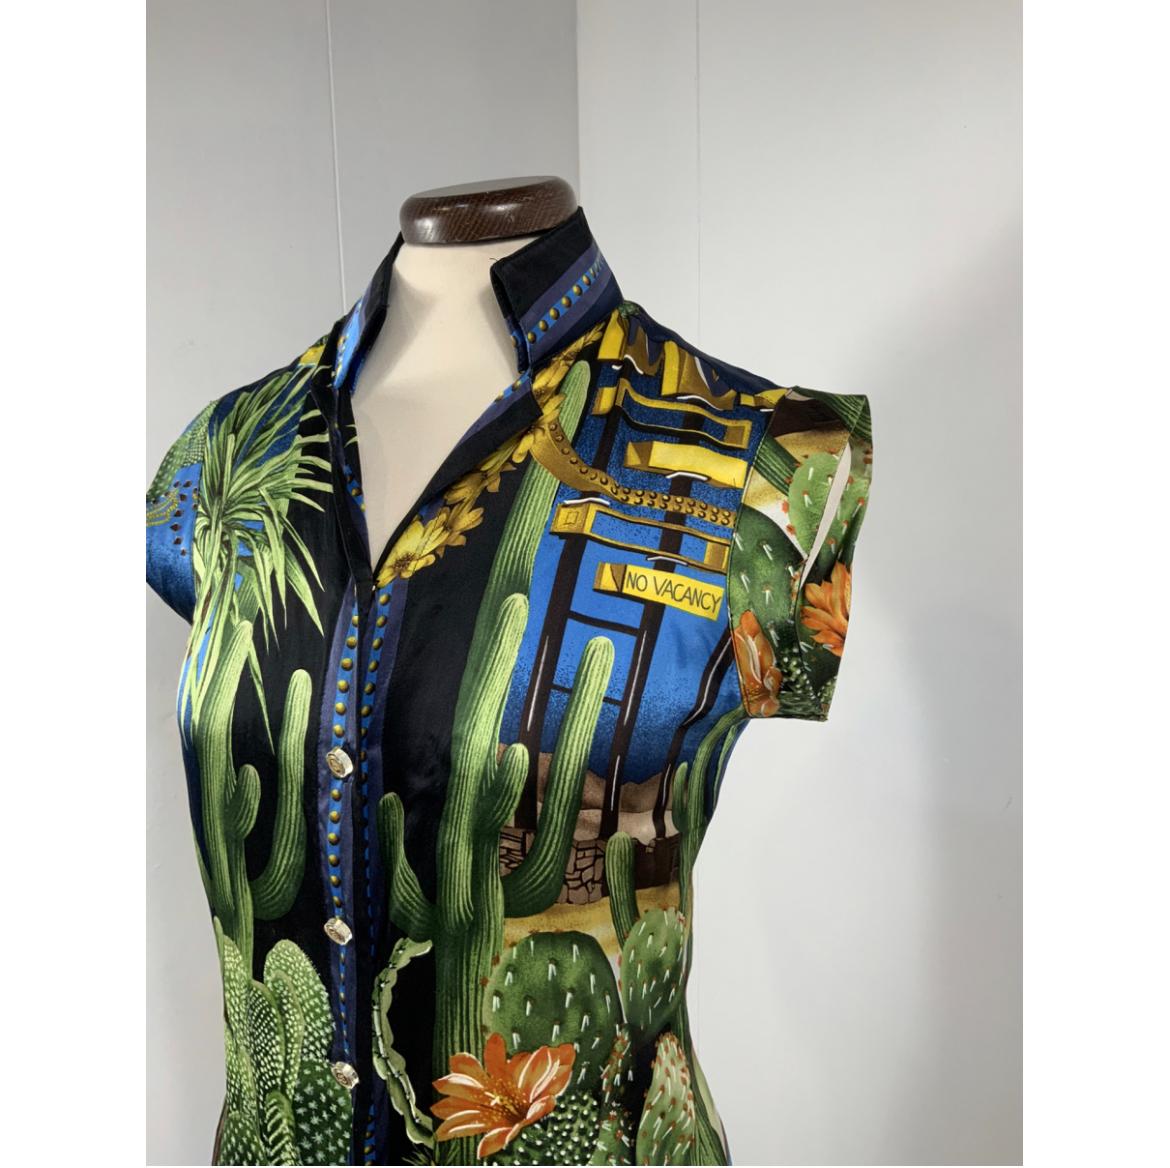 VERSACE BLOUSE.
Missing label composition and size.
We think it's silk.
She wears an Italian 38/40.
Shoulders 40 cm
Bust 40 cm
Length 66 cm
Good general condition shows signs of normal use. The first button of the closure is missing.
It has a few